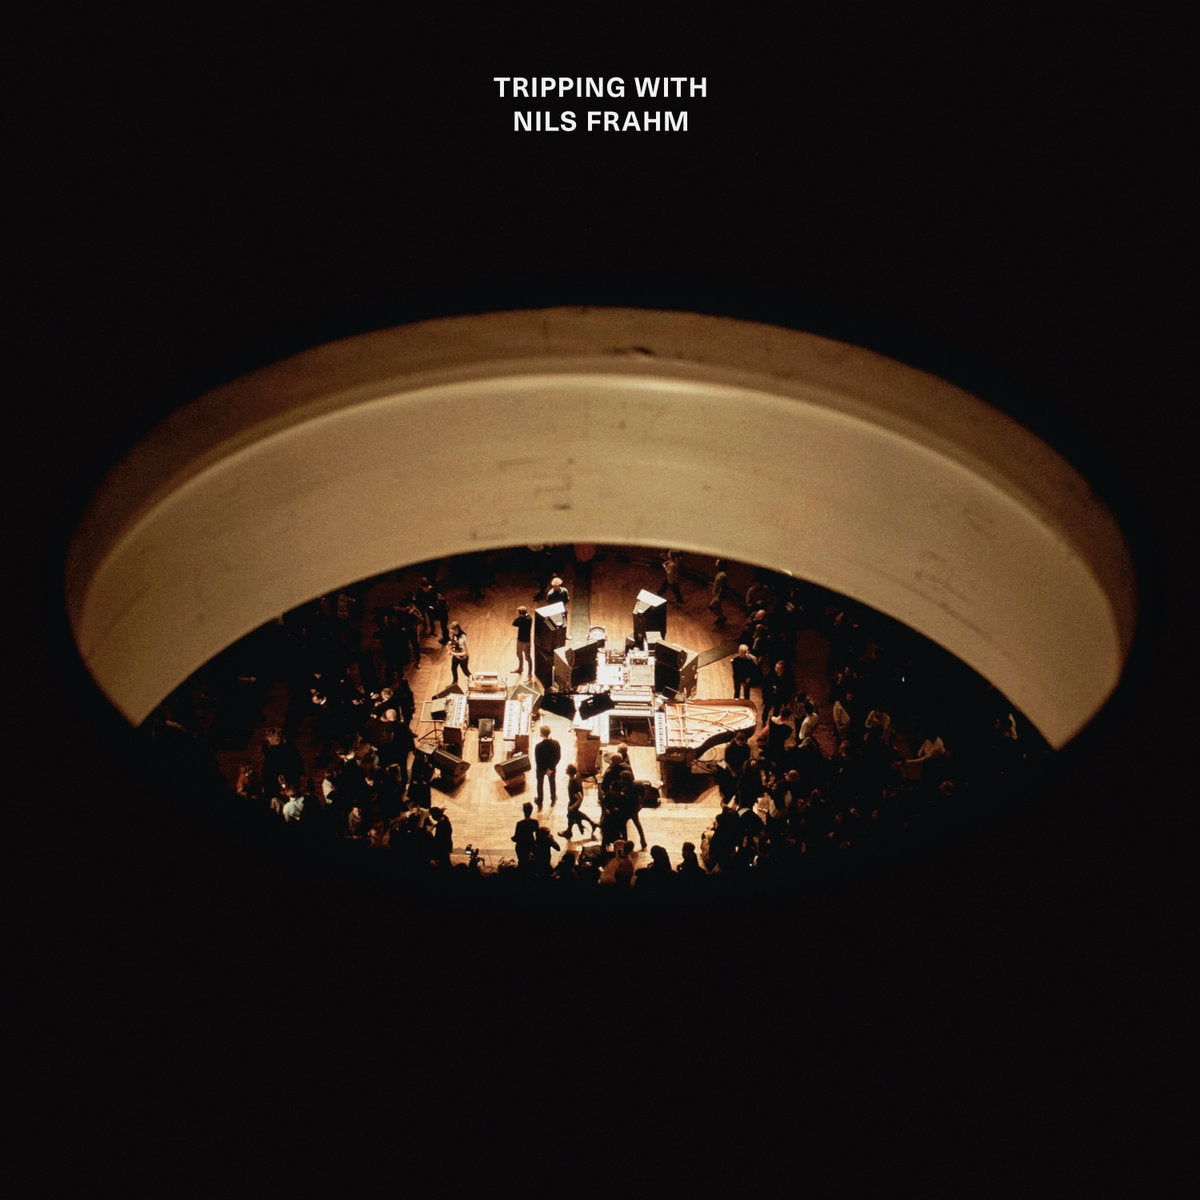 Tripping with Nils Frahm (New 2LP)